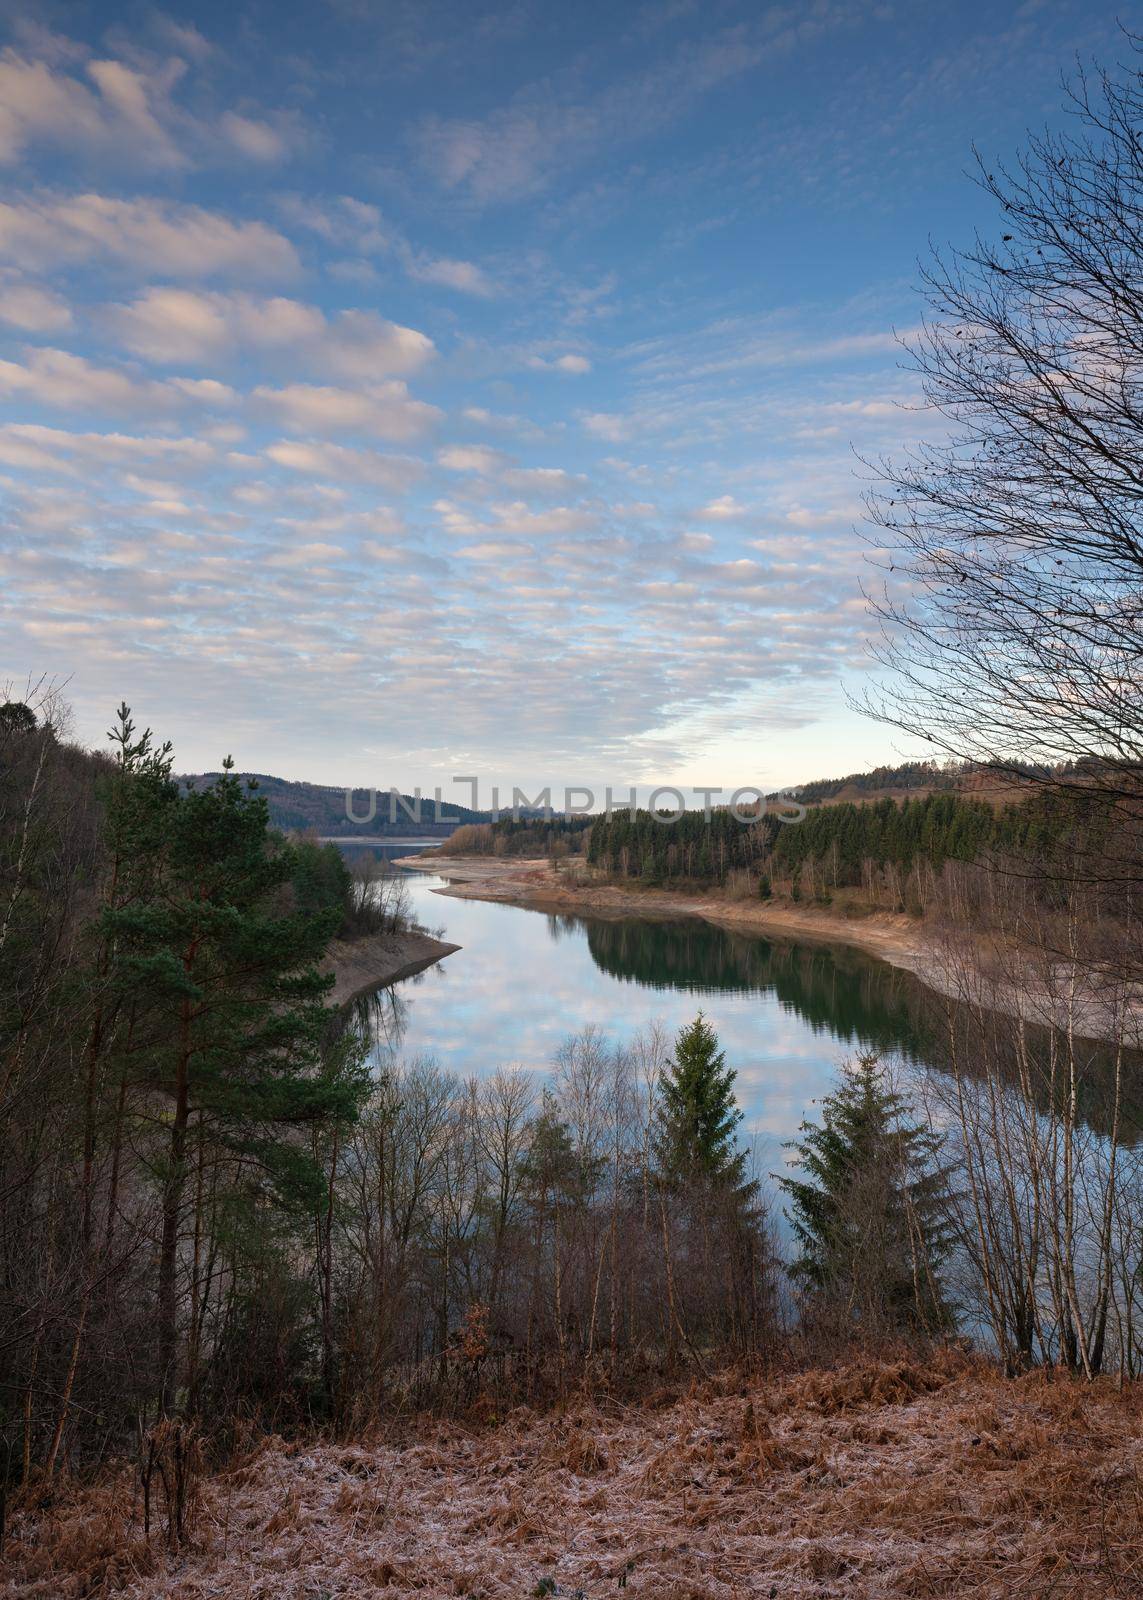 Panoramic image of Dhunn water reservoir at sunrise, Bergisches Land, Germany